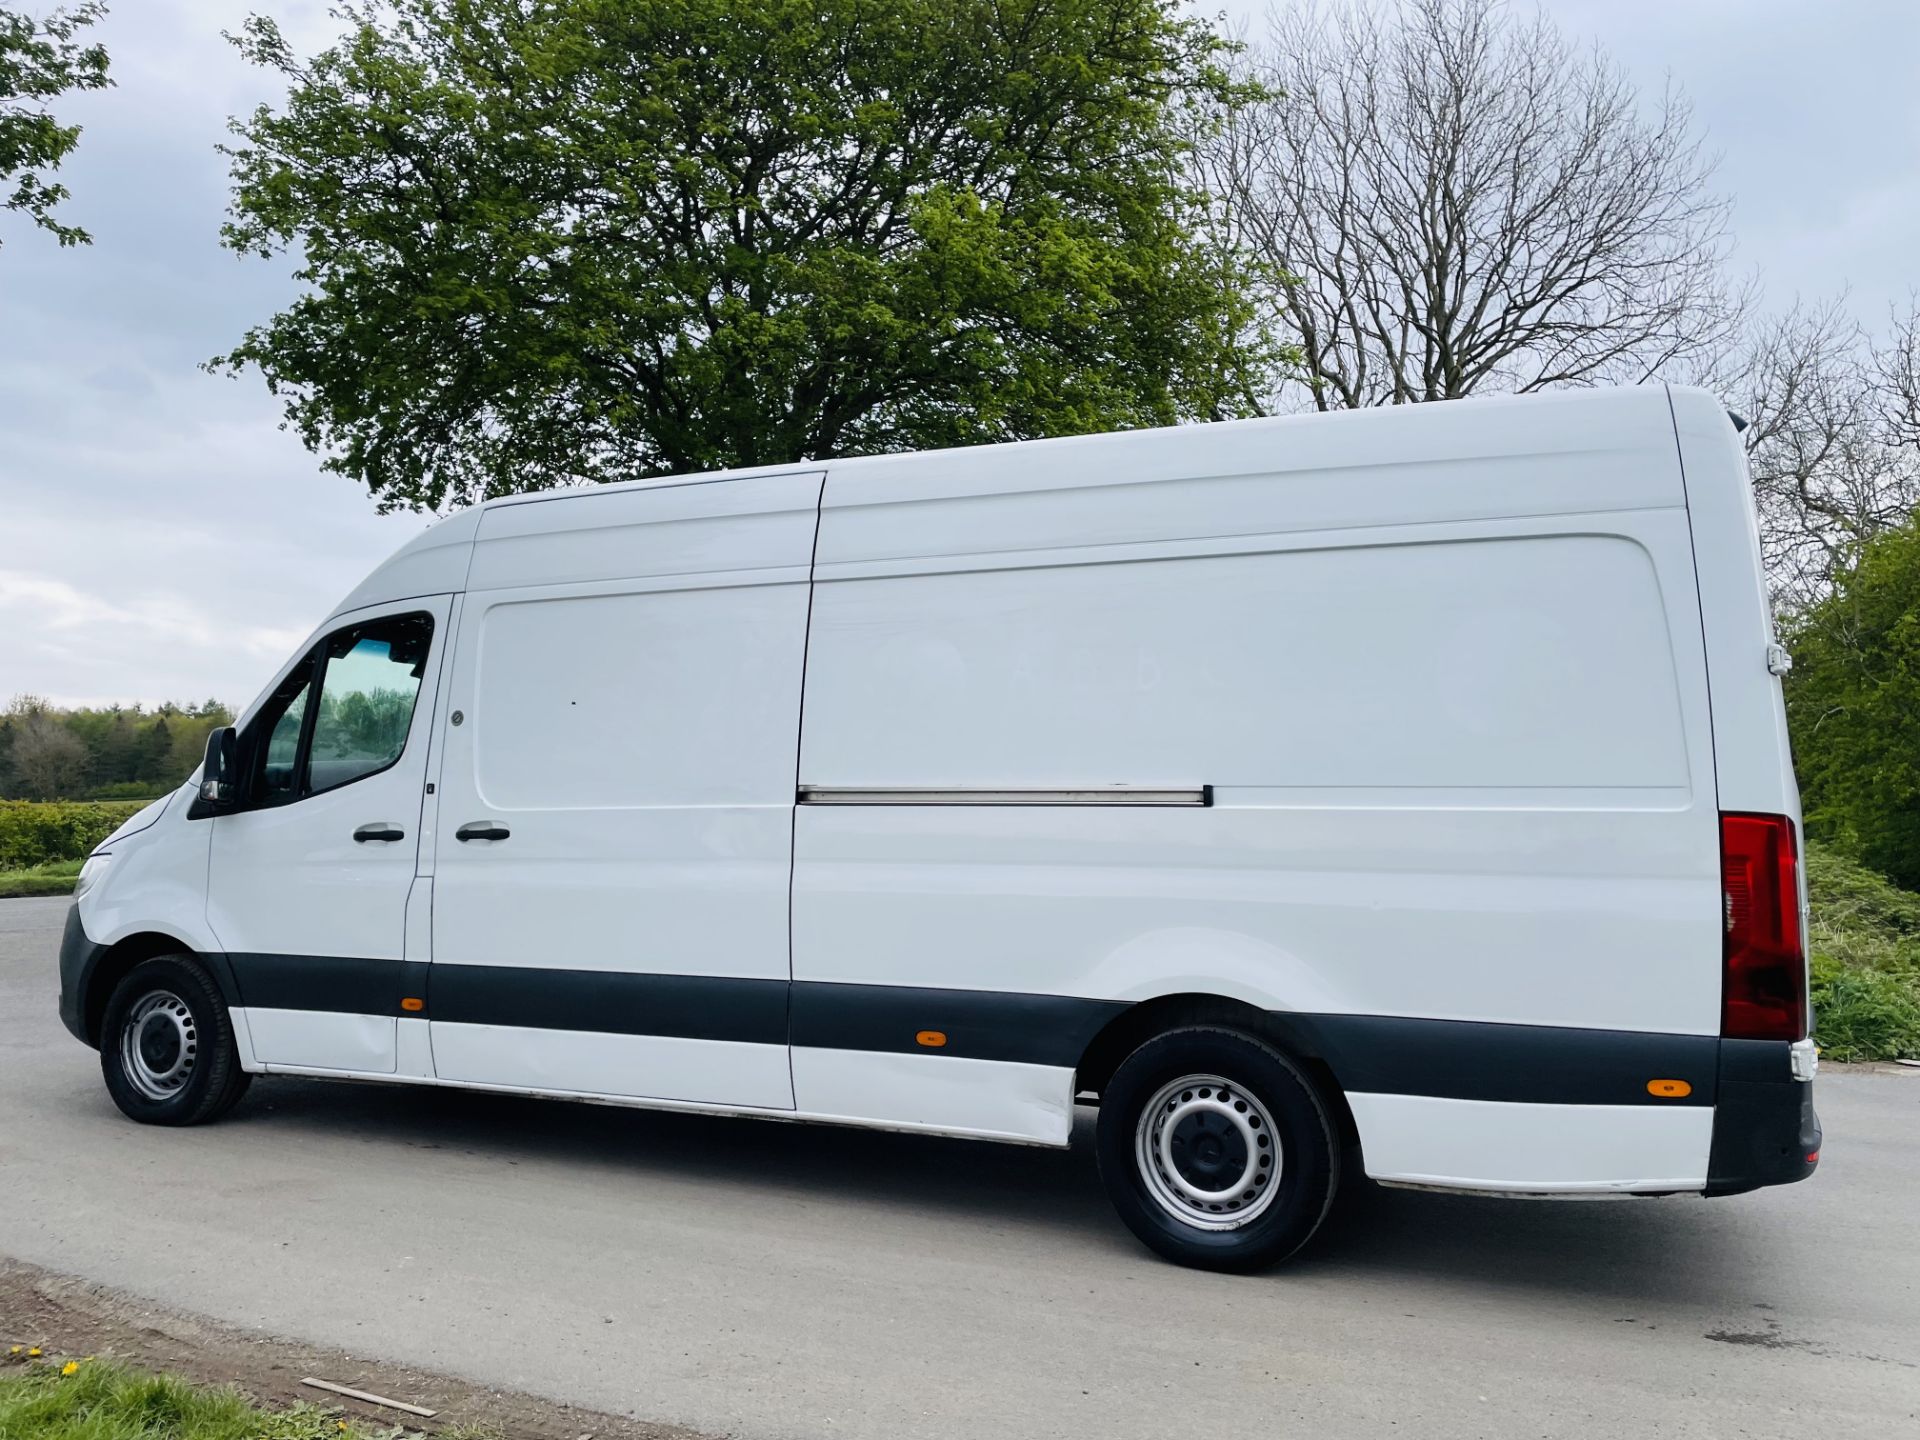 (ON SALE) MERCEDES SPRINTER 314CDI "LWB" HIGH ROOF (19 REG) EURO 6 - ONLY 83K MILES - CRUISE CONTROL - Image 6 of 17